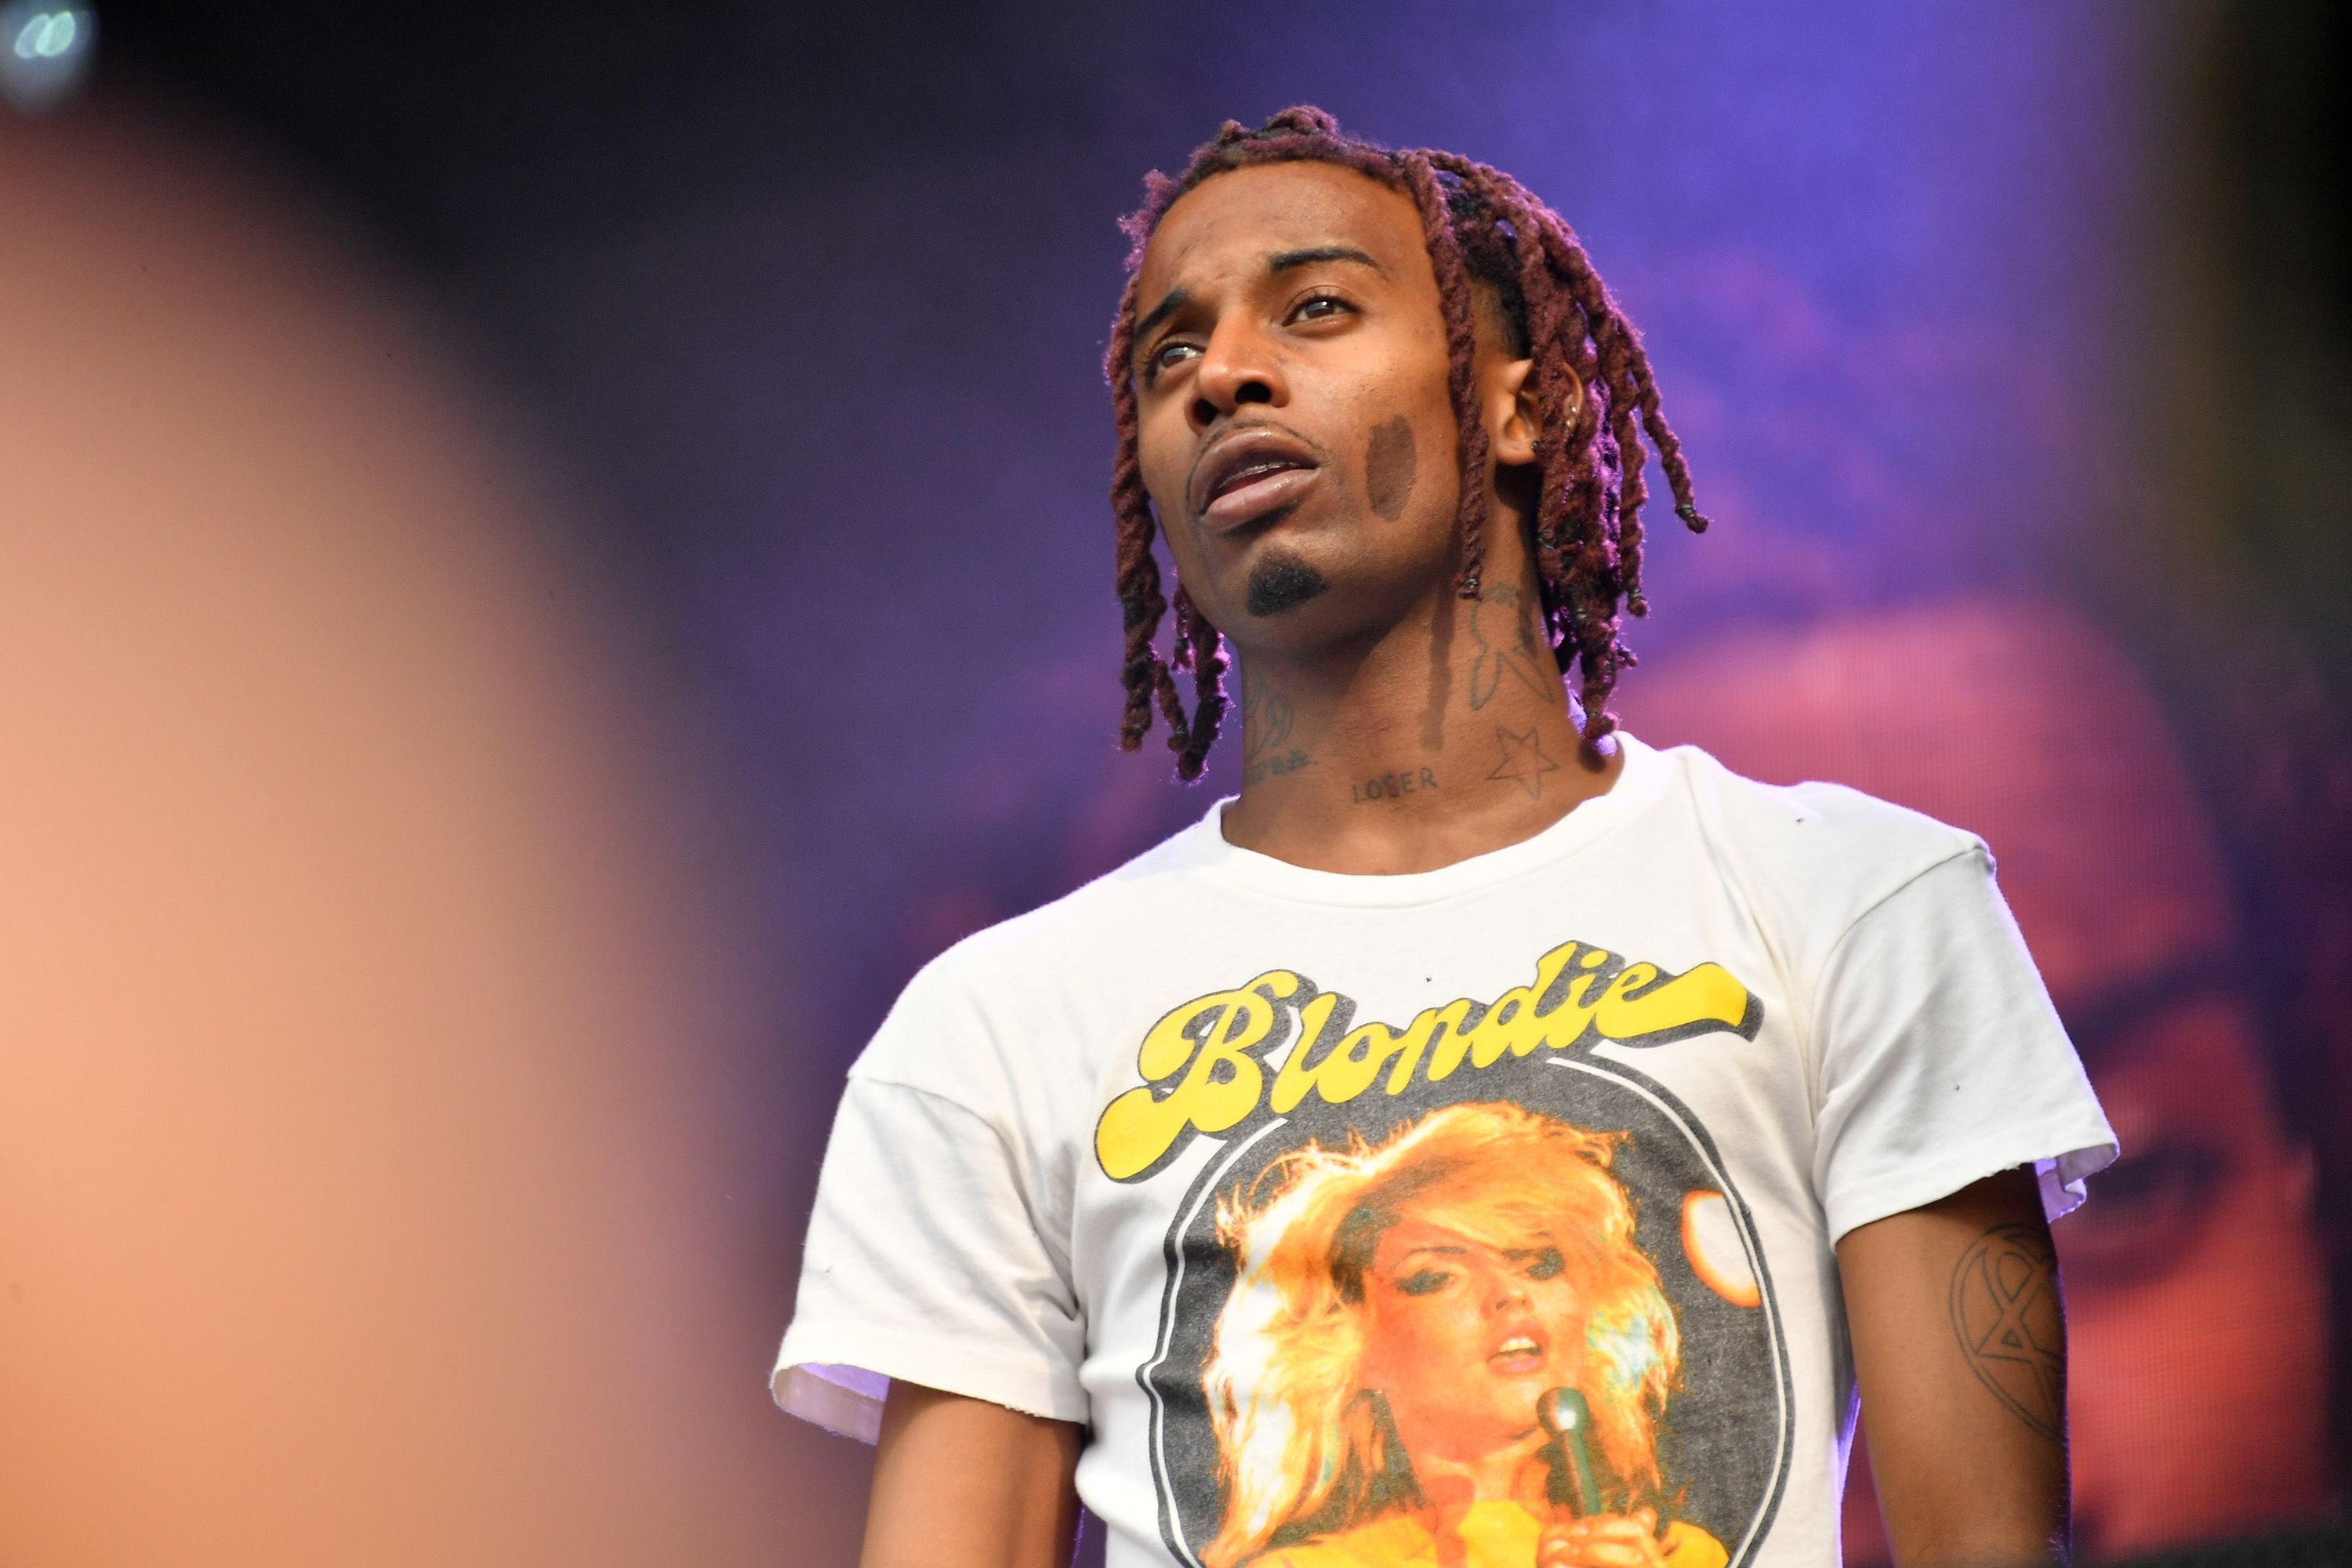 Playboi Carti during the 2019 Governors Ball Festival at Randall's Island on June 01, 2019, in New York City. | Source: Getty Images